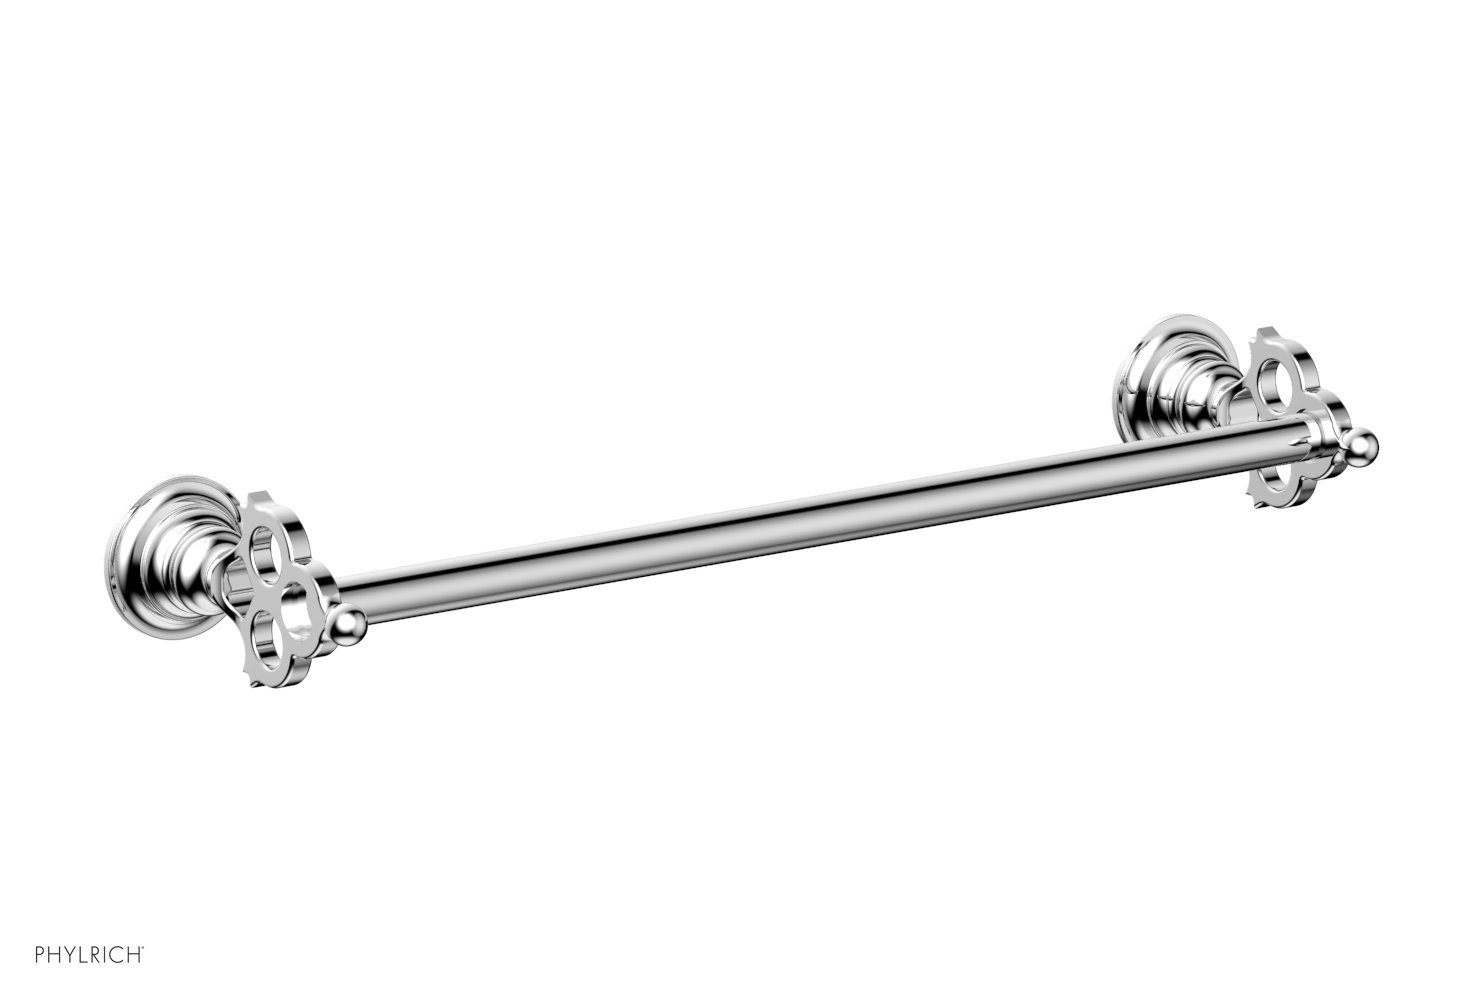 PHYLRICH 164-70 MAISON 18 3/8 INCH WALL MOUNT TOWEL BAR